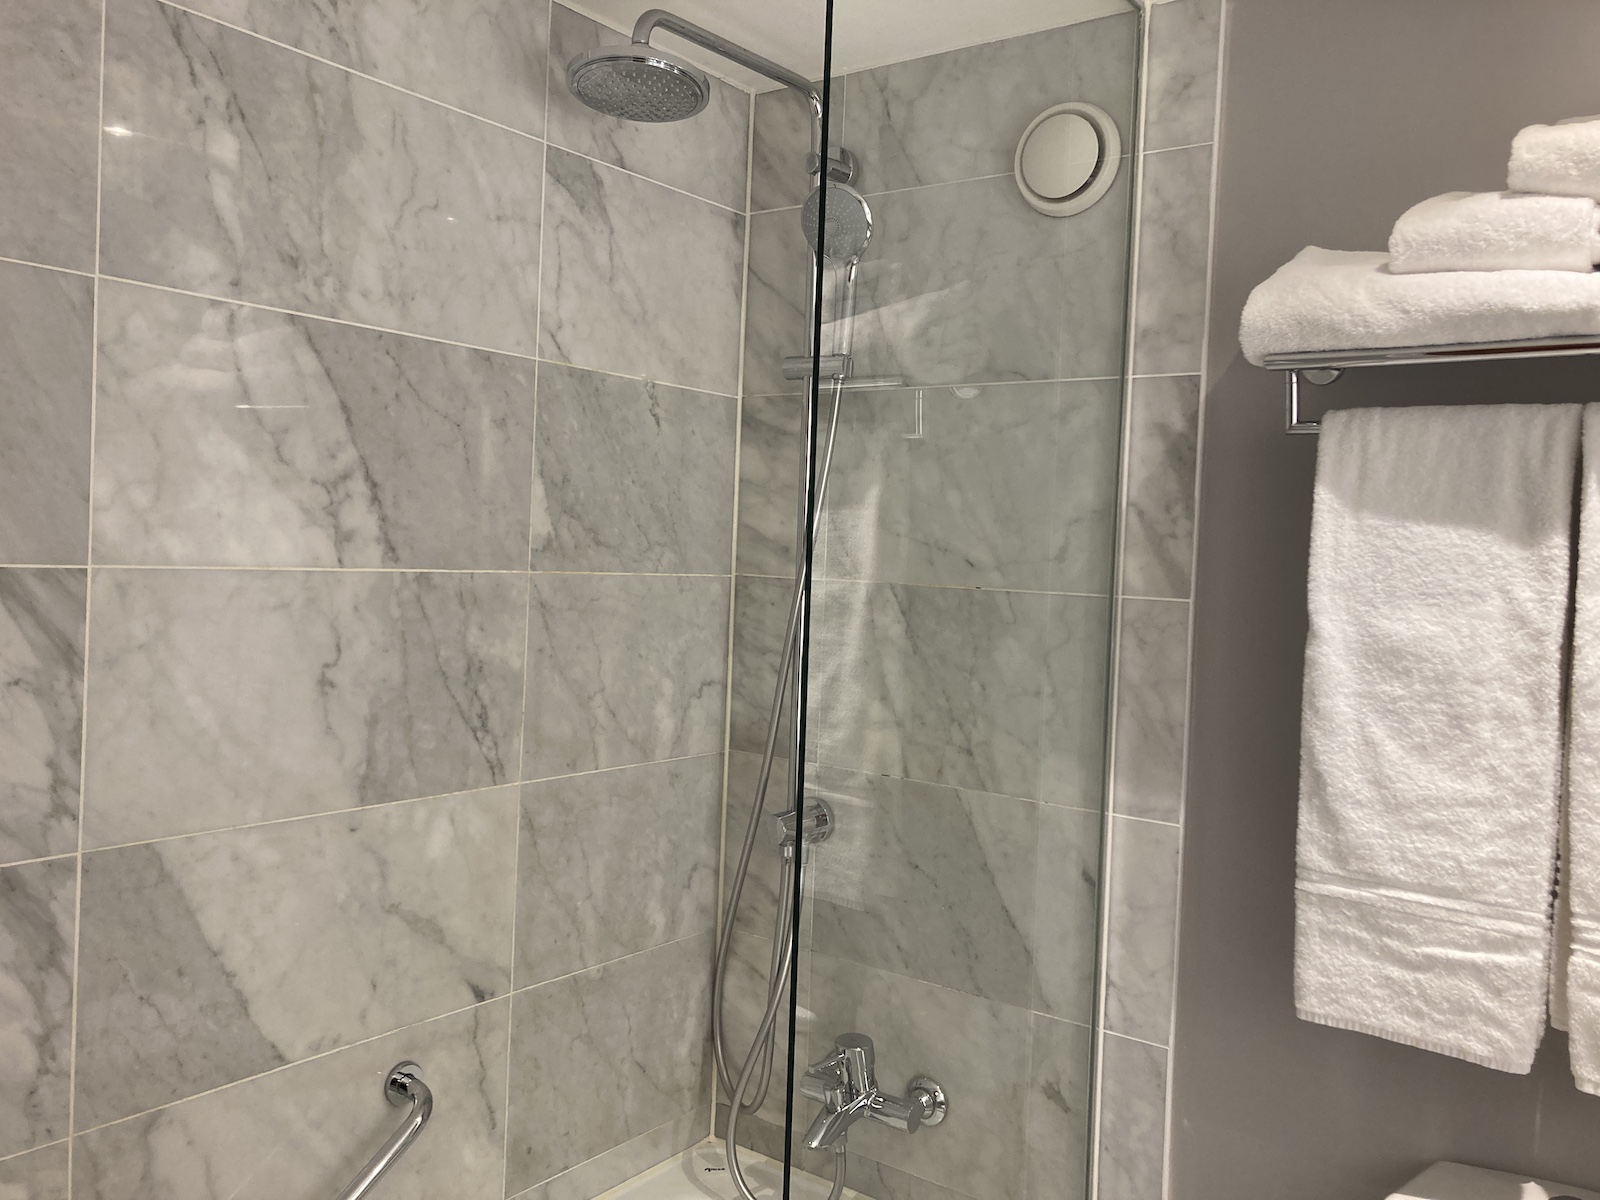 Image of the shower in our suite at the Sheraton Stockholm Hotel, part of my review.